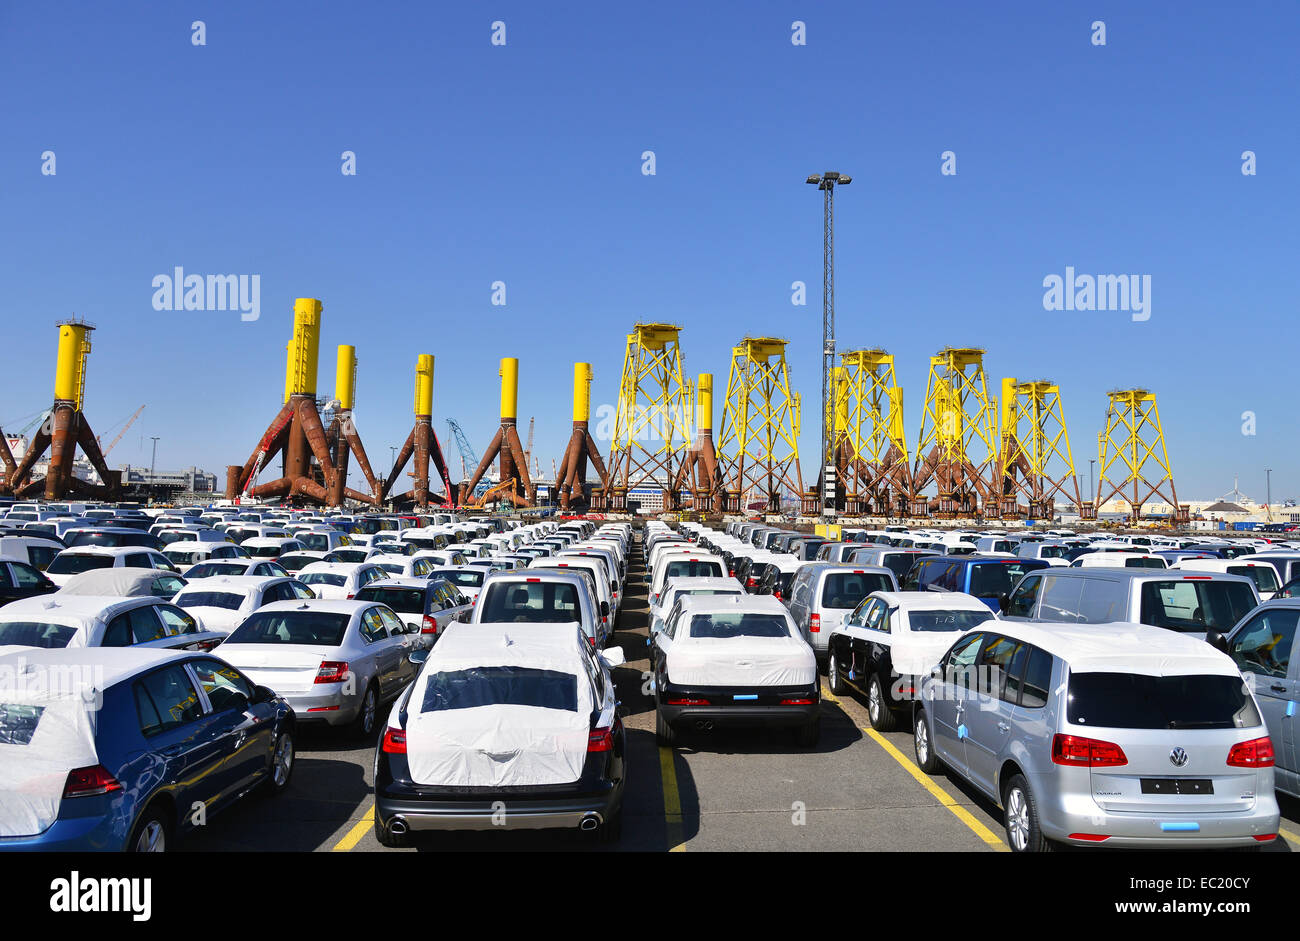 New cars, components for offshore wind turbines in the back, port, Bremerhaven, Bremen, Germany Stock Photo